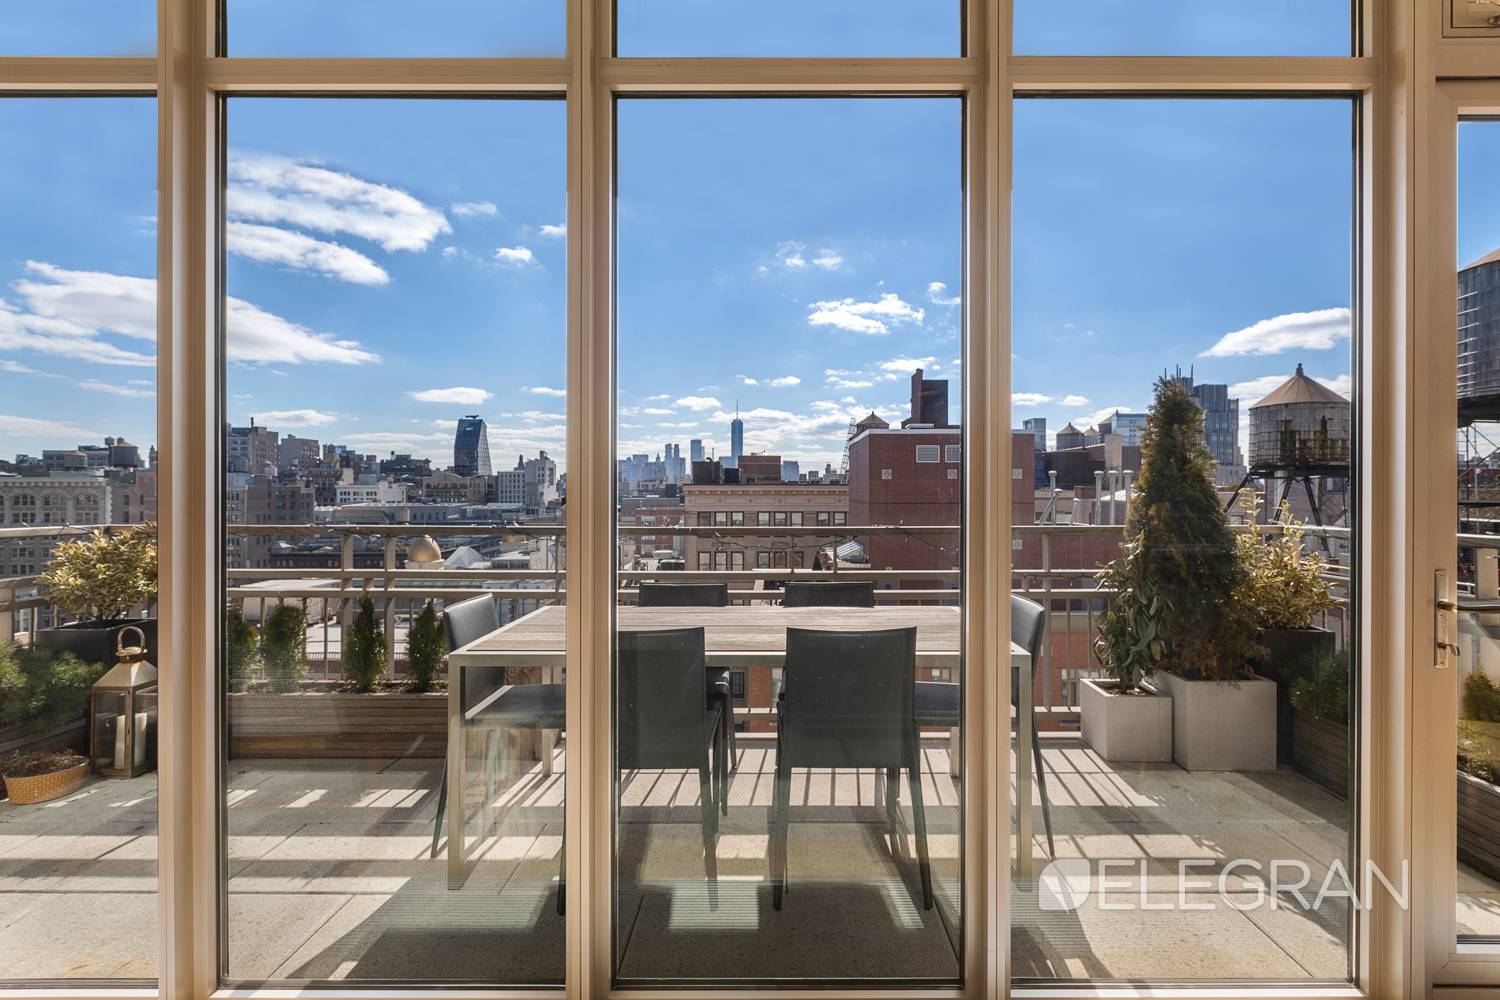 BRING OFFERS ! Full Floor Three Bedroom Home with Outdoor Space at the Citizen Condominium Located on the 16th floor, this stunning three bedroom, three bath residence offers thoughtful design, ...